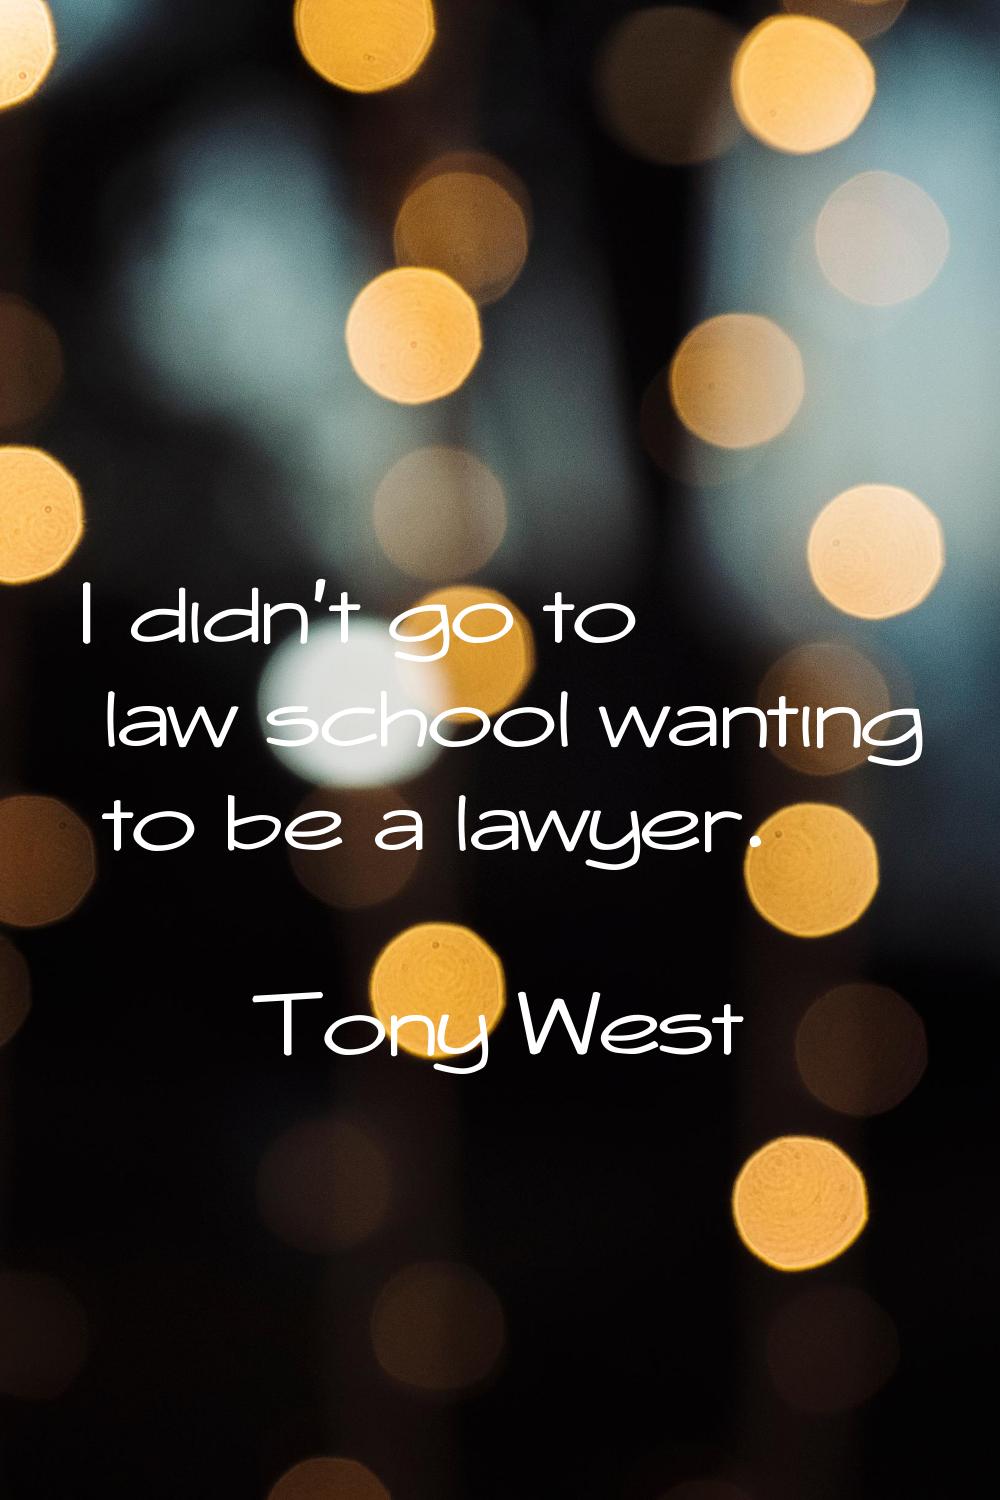 I didn't go to law school wanting to be a lawyer.